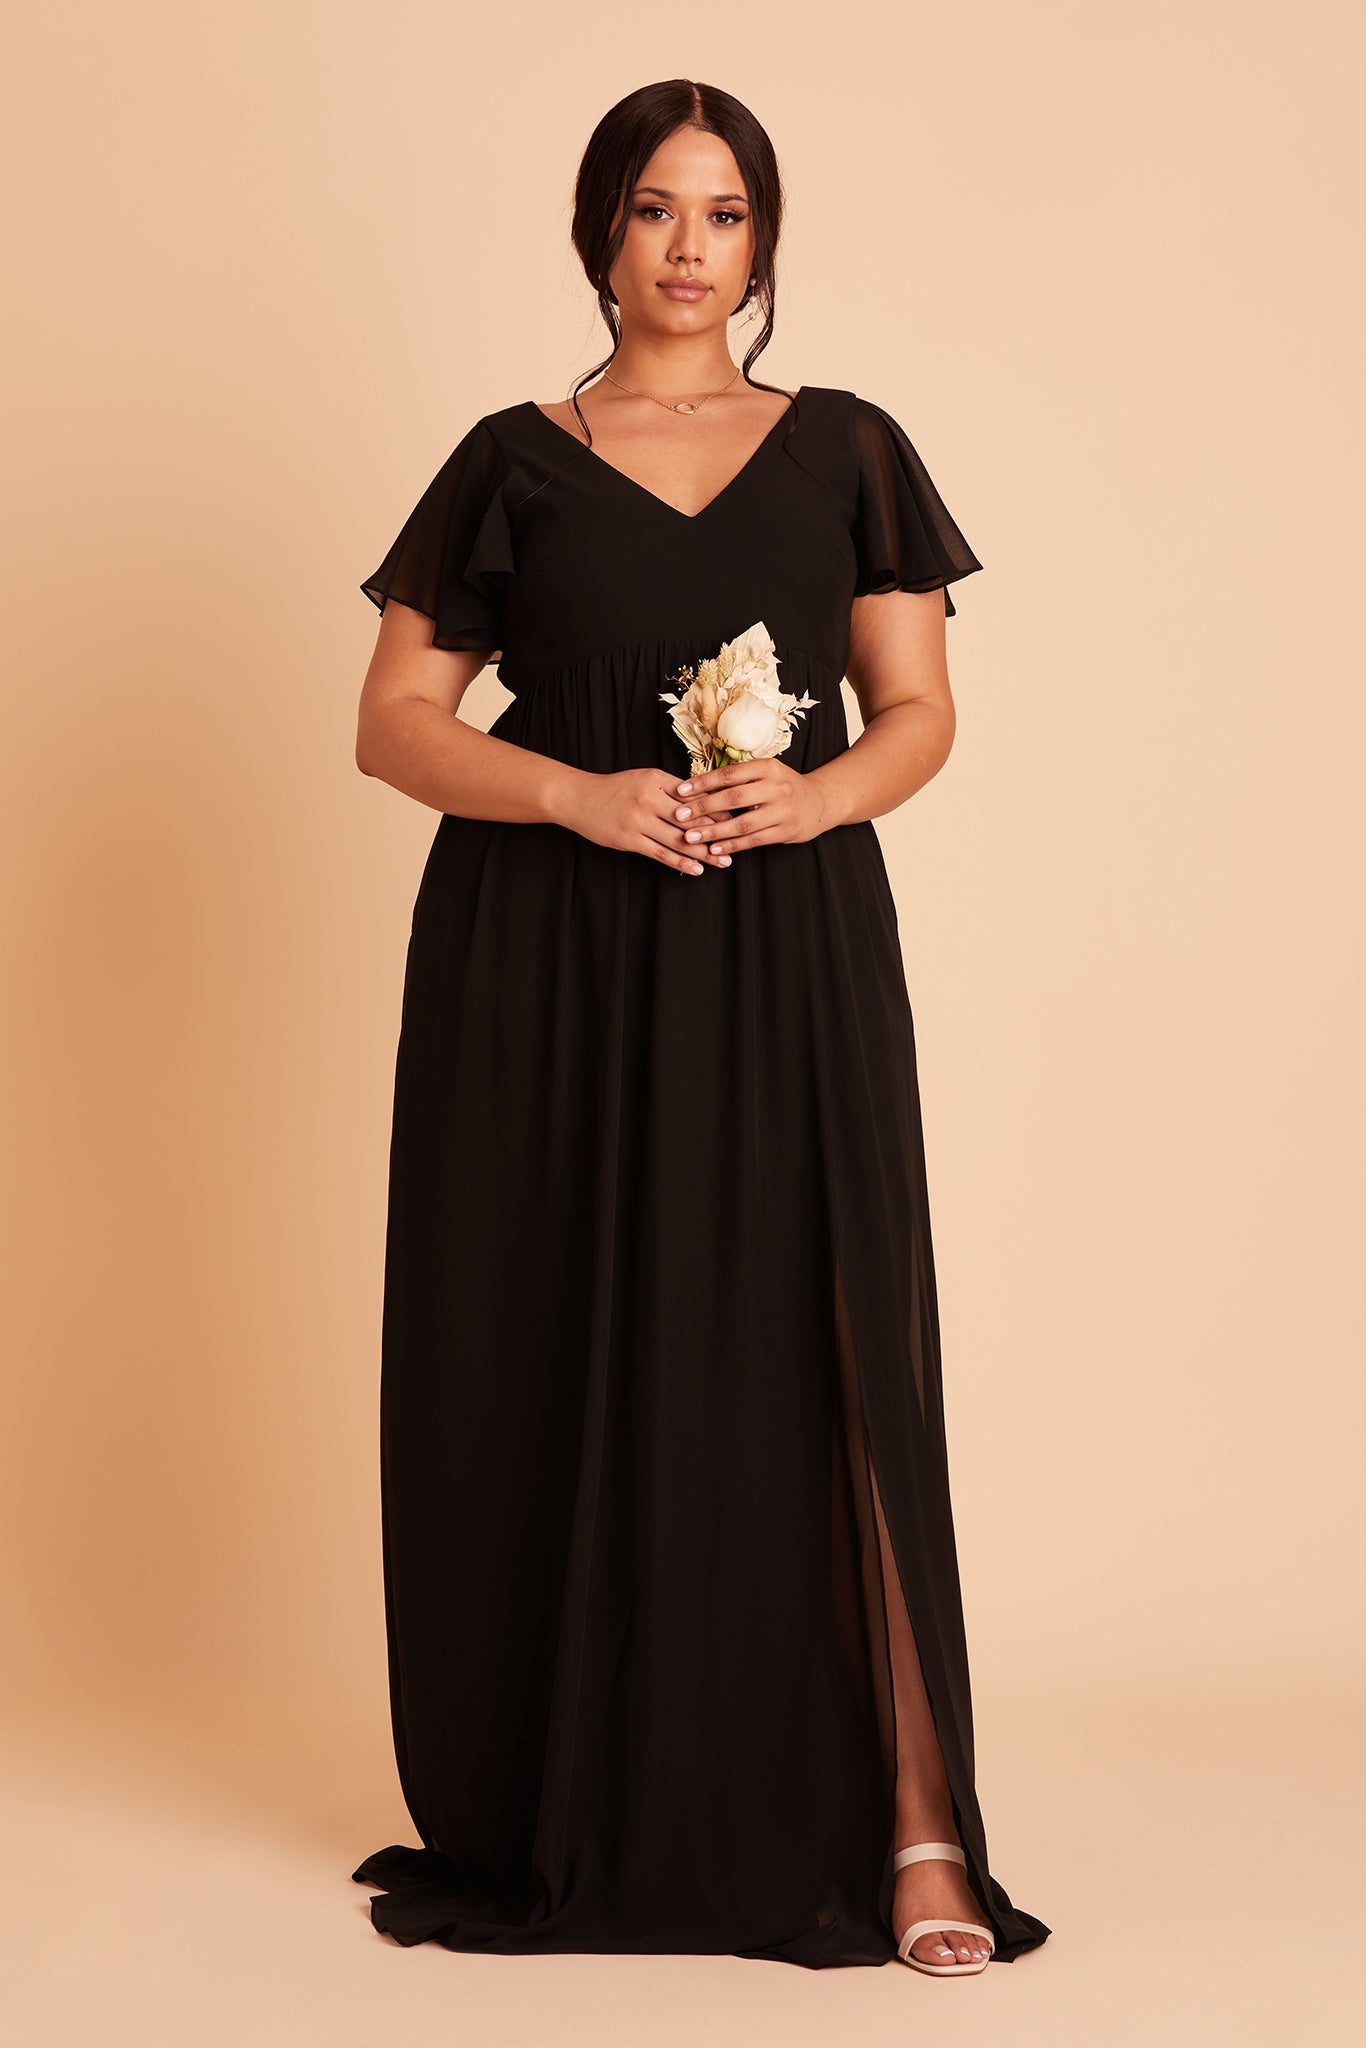 Hannah empire plus size bridesmaid dress in black chiffon by Birdy Grey, front view